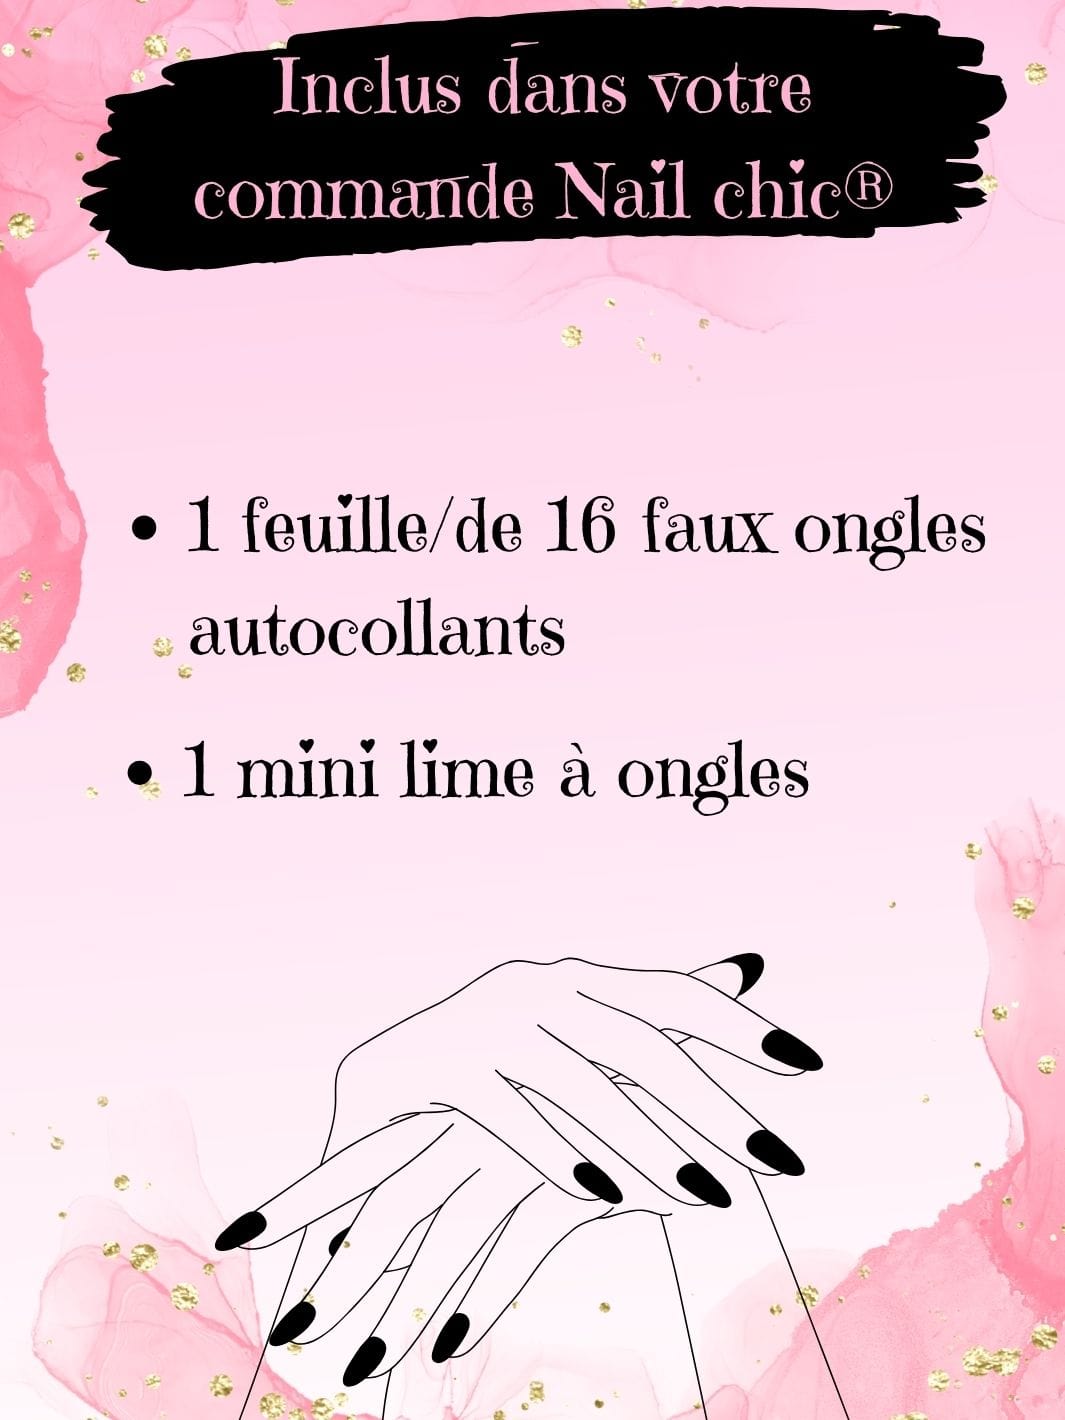 Faux ongle autocollant Nail Chic